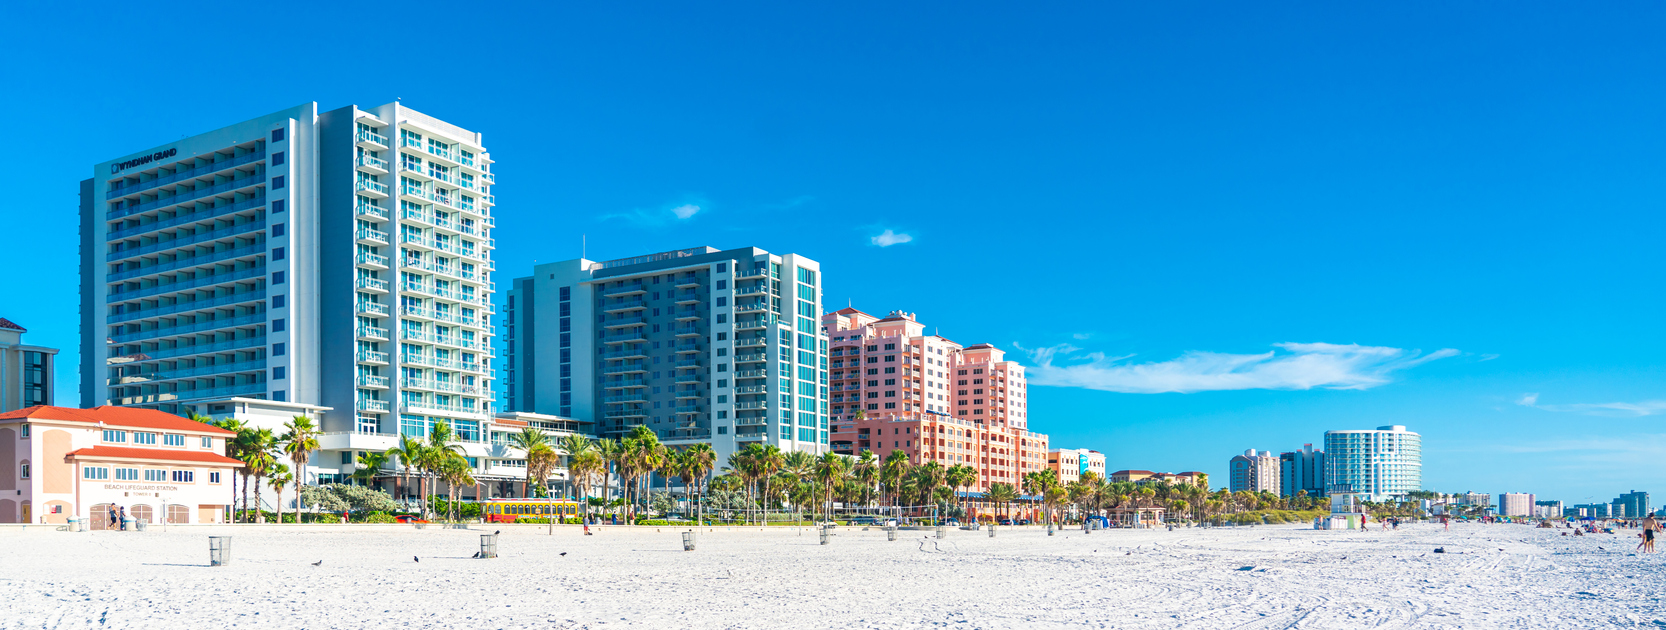 clearwater florida houses and beach. Florida Sports Betting: What You Need to Know